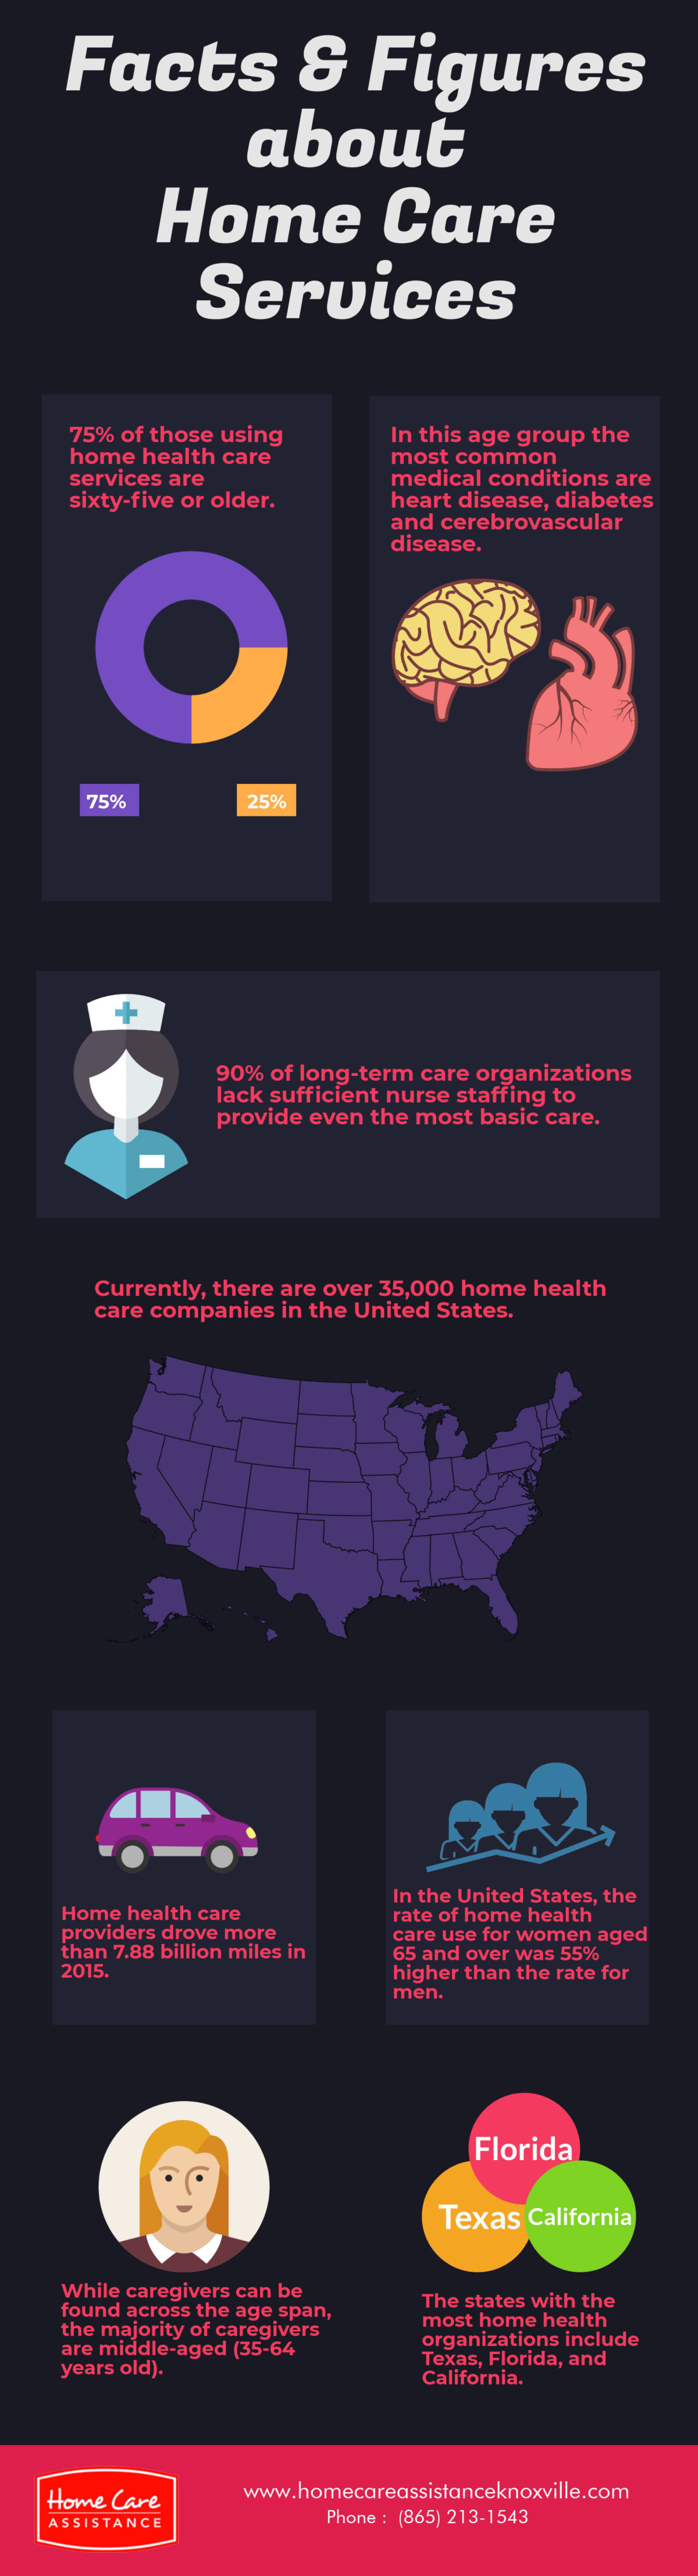 home-care-services-facts-figures-infographic-plaza